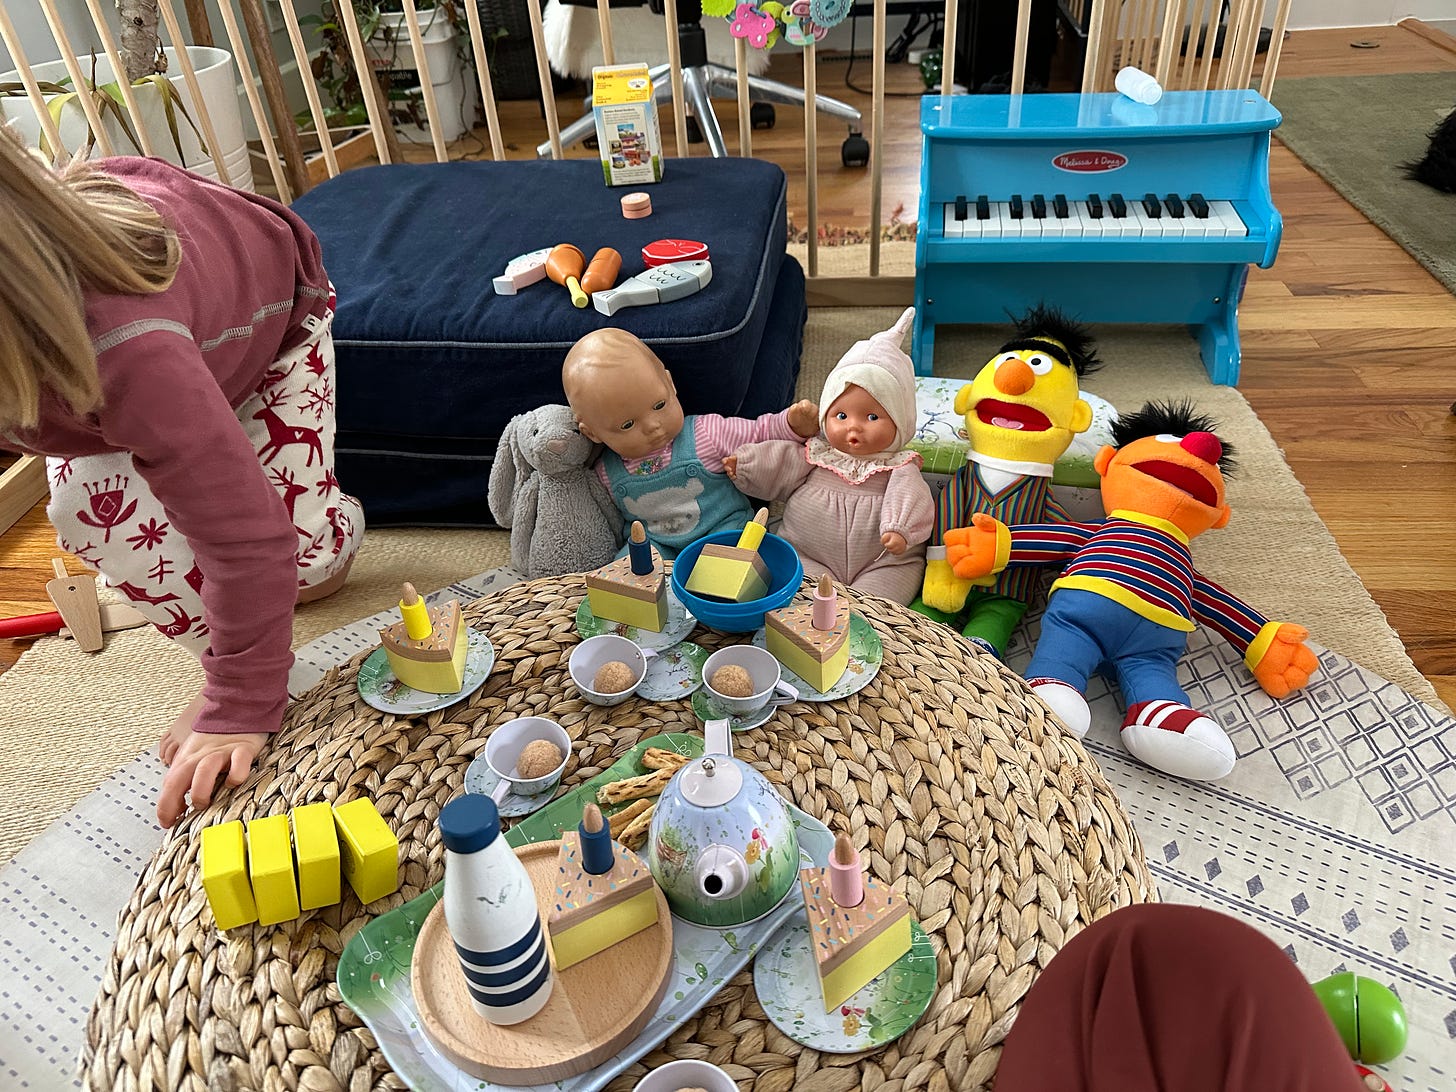 Toddler tea party with her stuffed animals